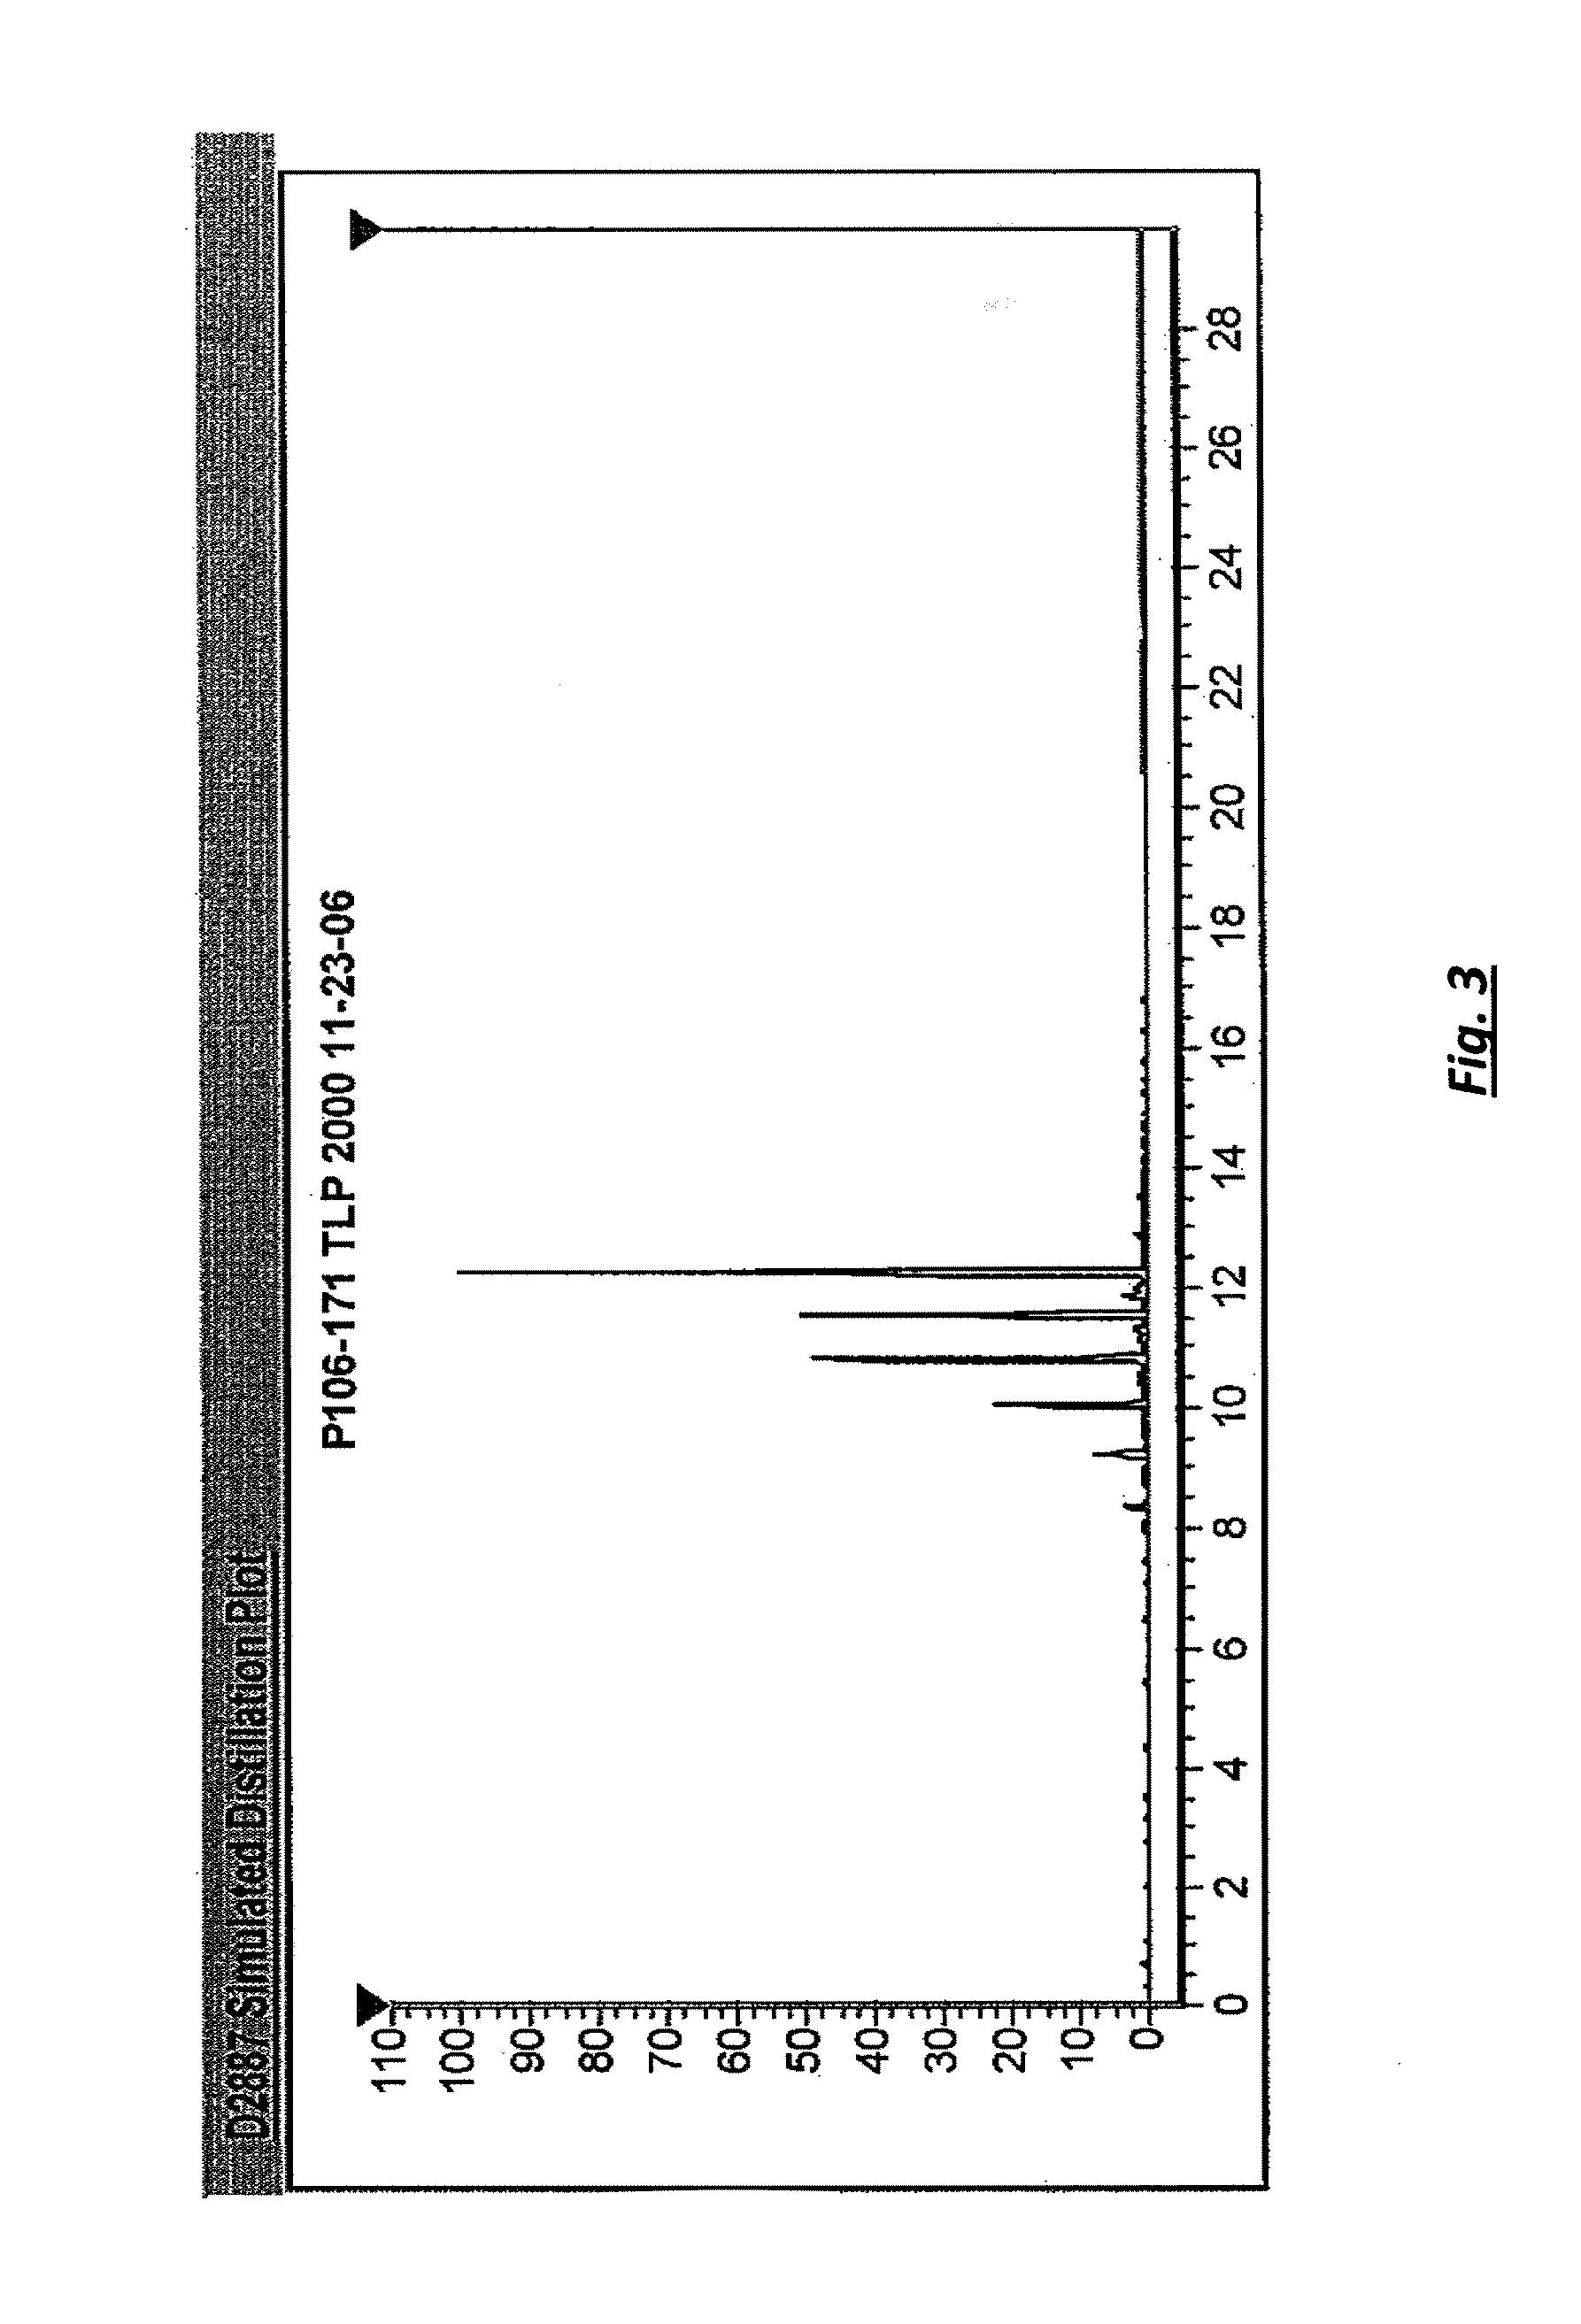 Biorenewable naphtha composition and methods of making same